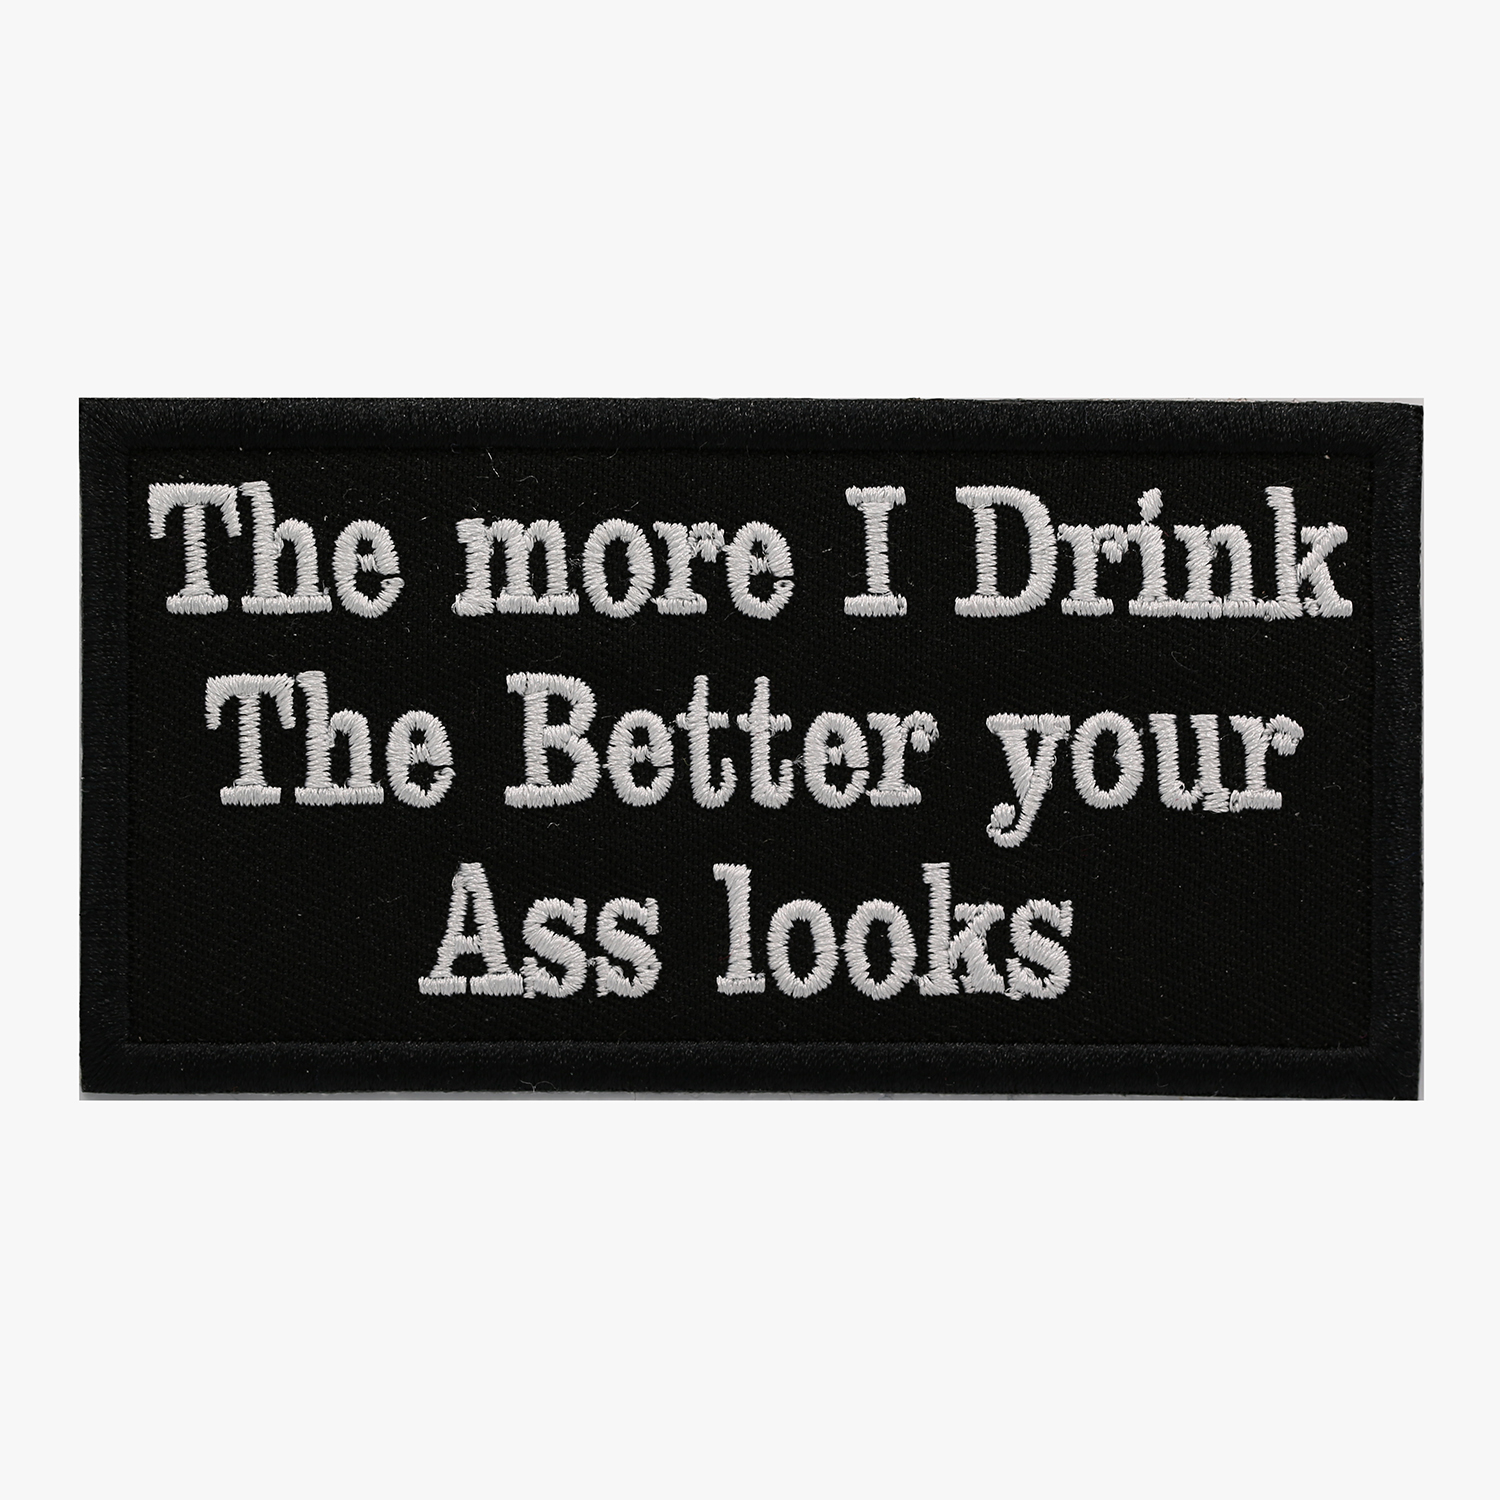 THE MORE I DRINK Embroidered Biker Leather Cut Patch